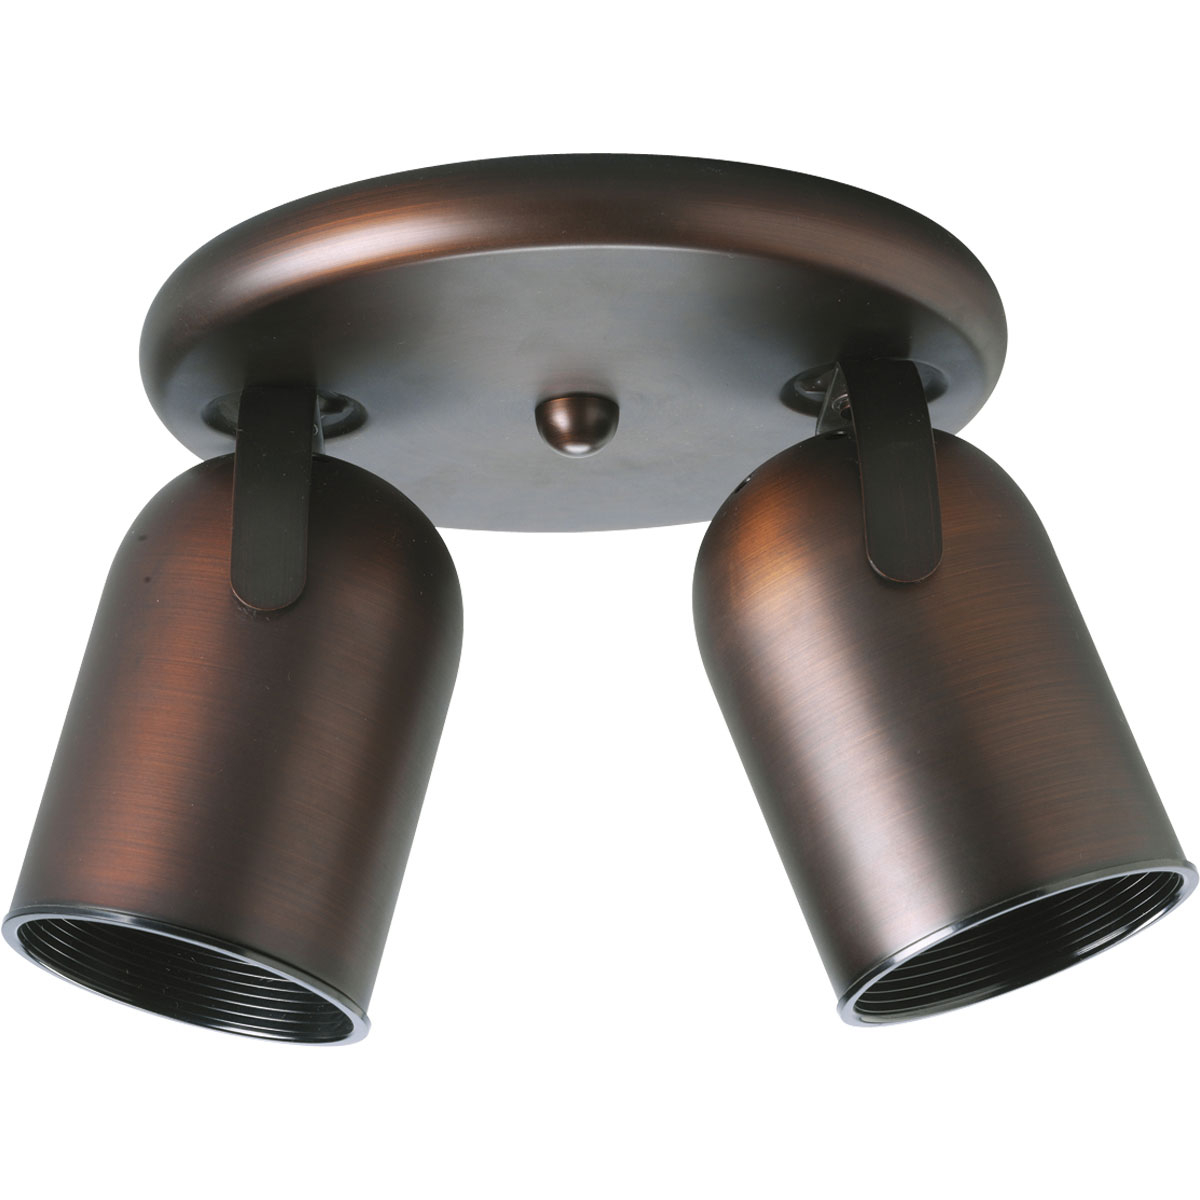 Two-light round back ceiling mount directional in Urban Bronze finish.